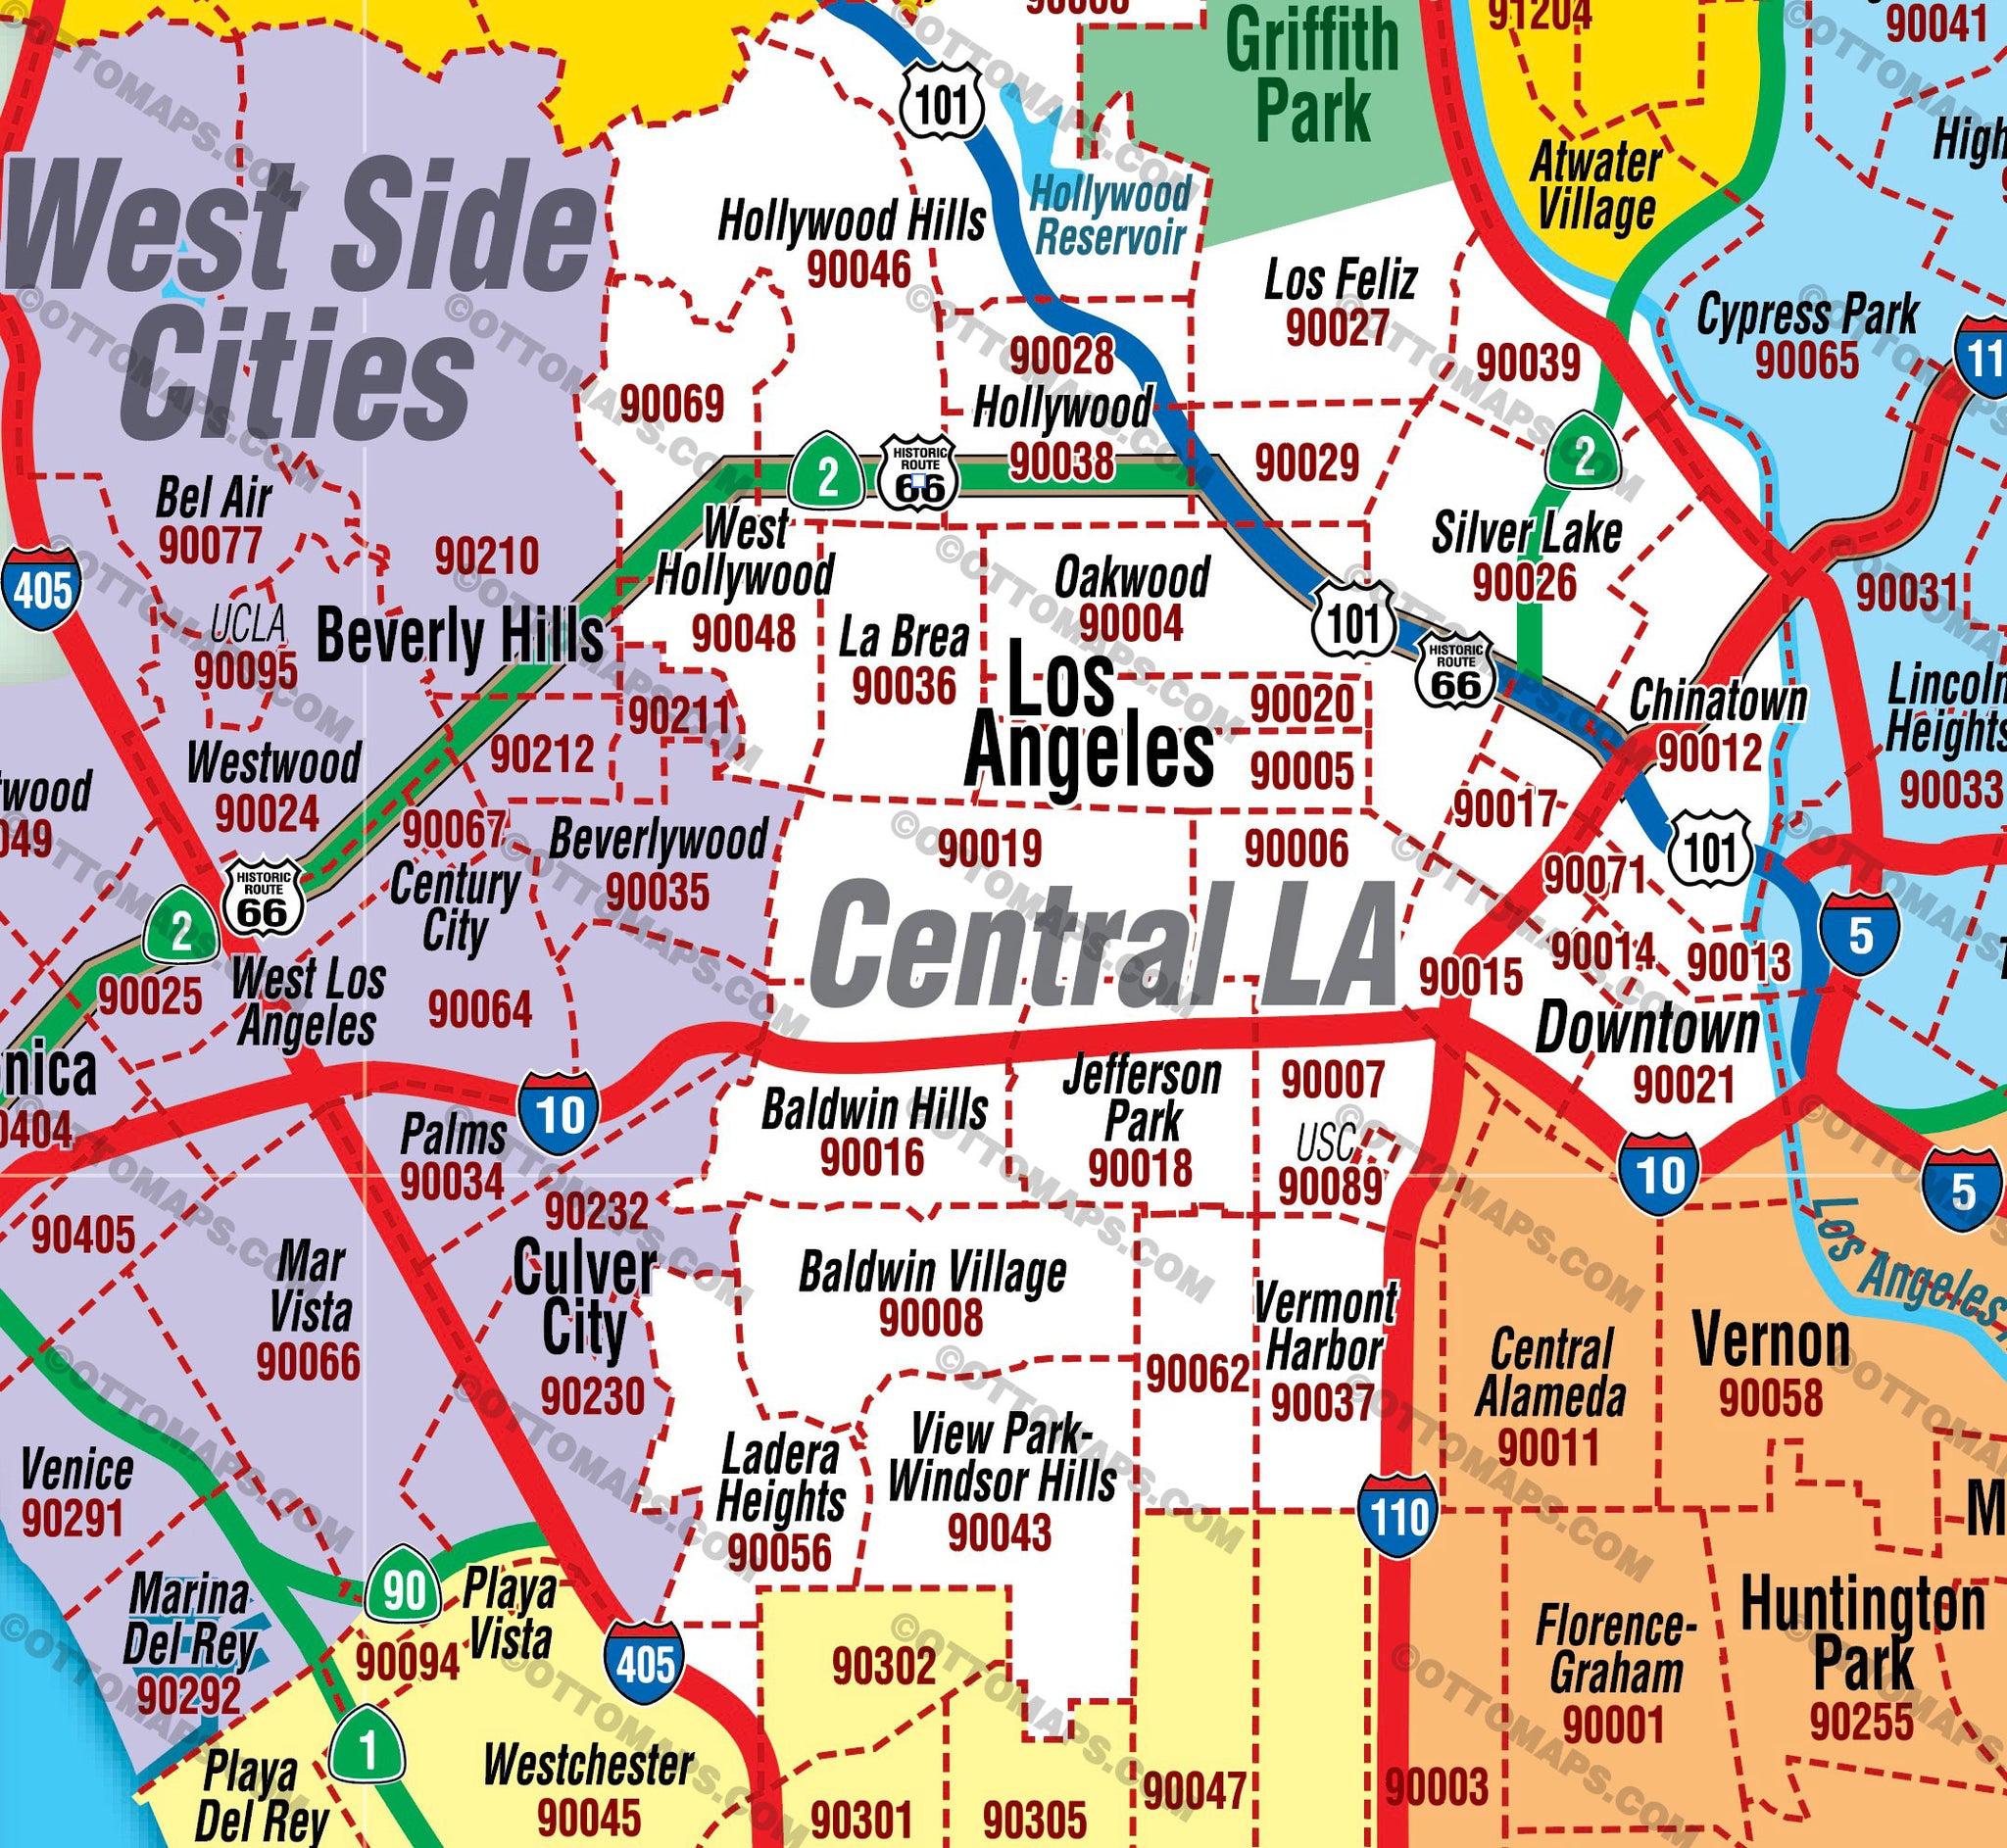 los angeles zip code map pdf Los Angeles Zip Code Map Full County Areas Colorized Otto Maps los angeles zip code map pdf